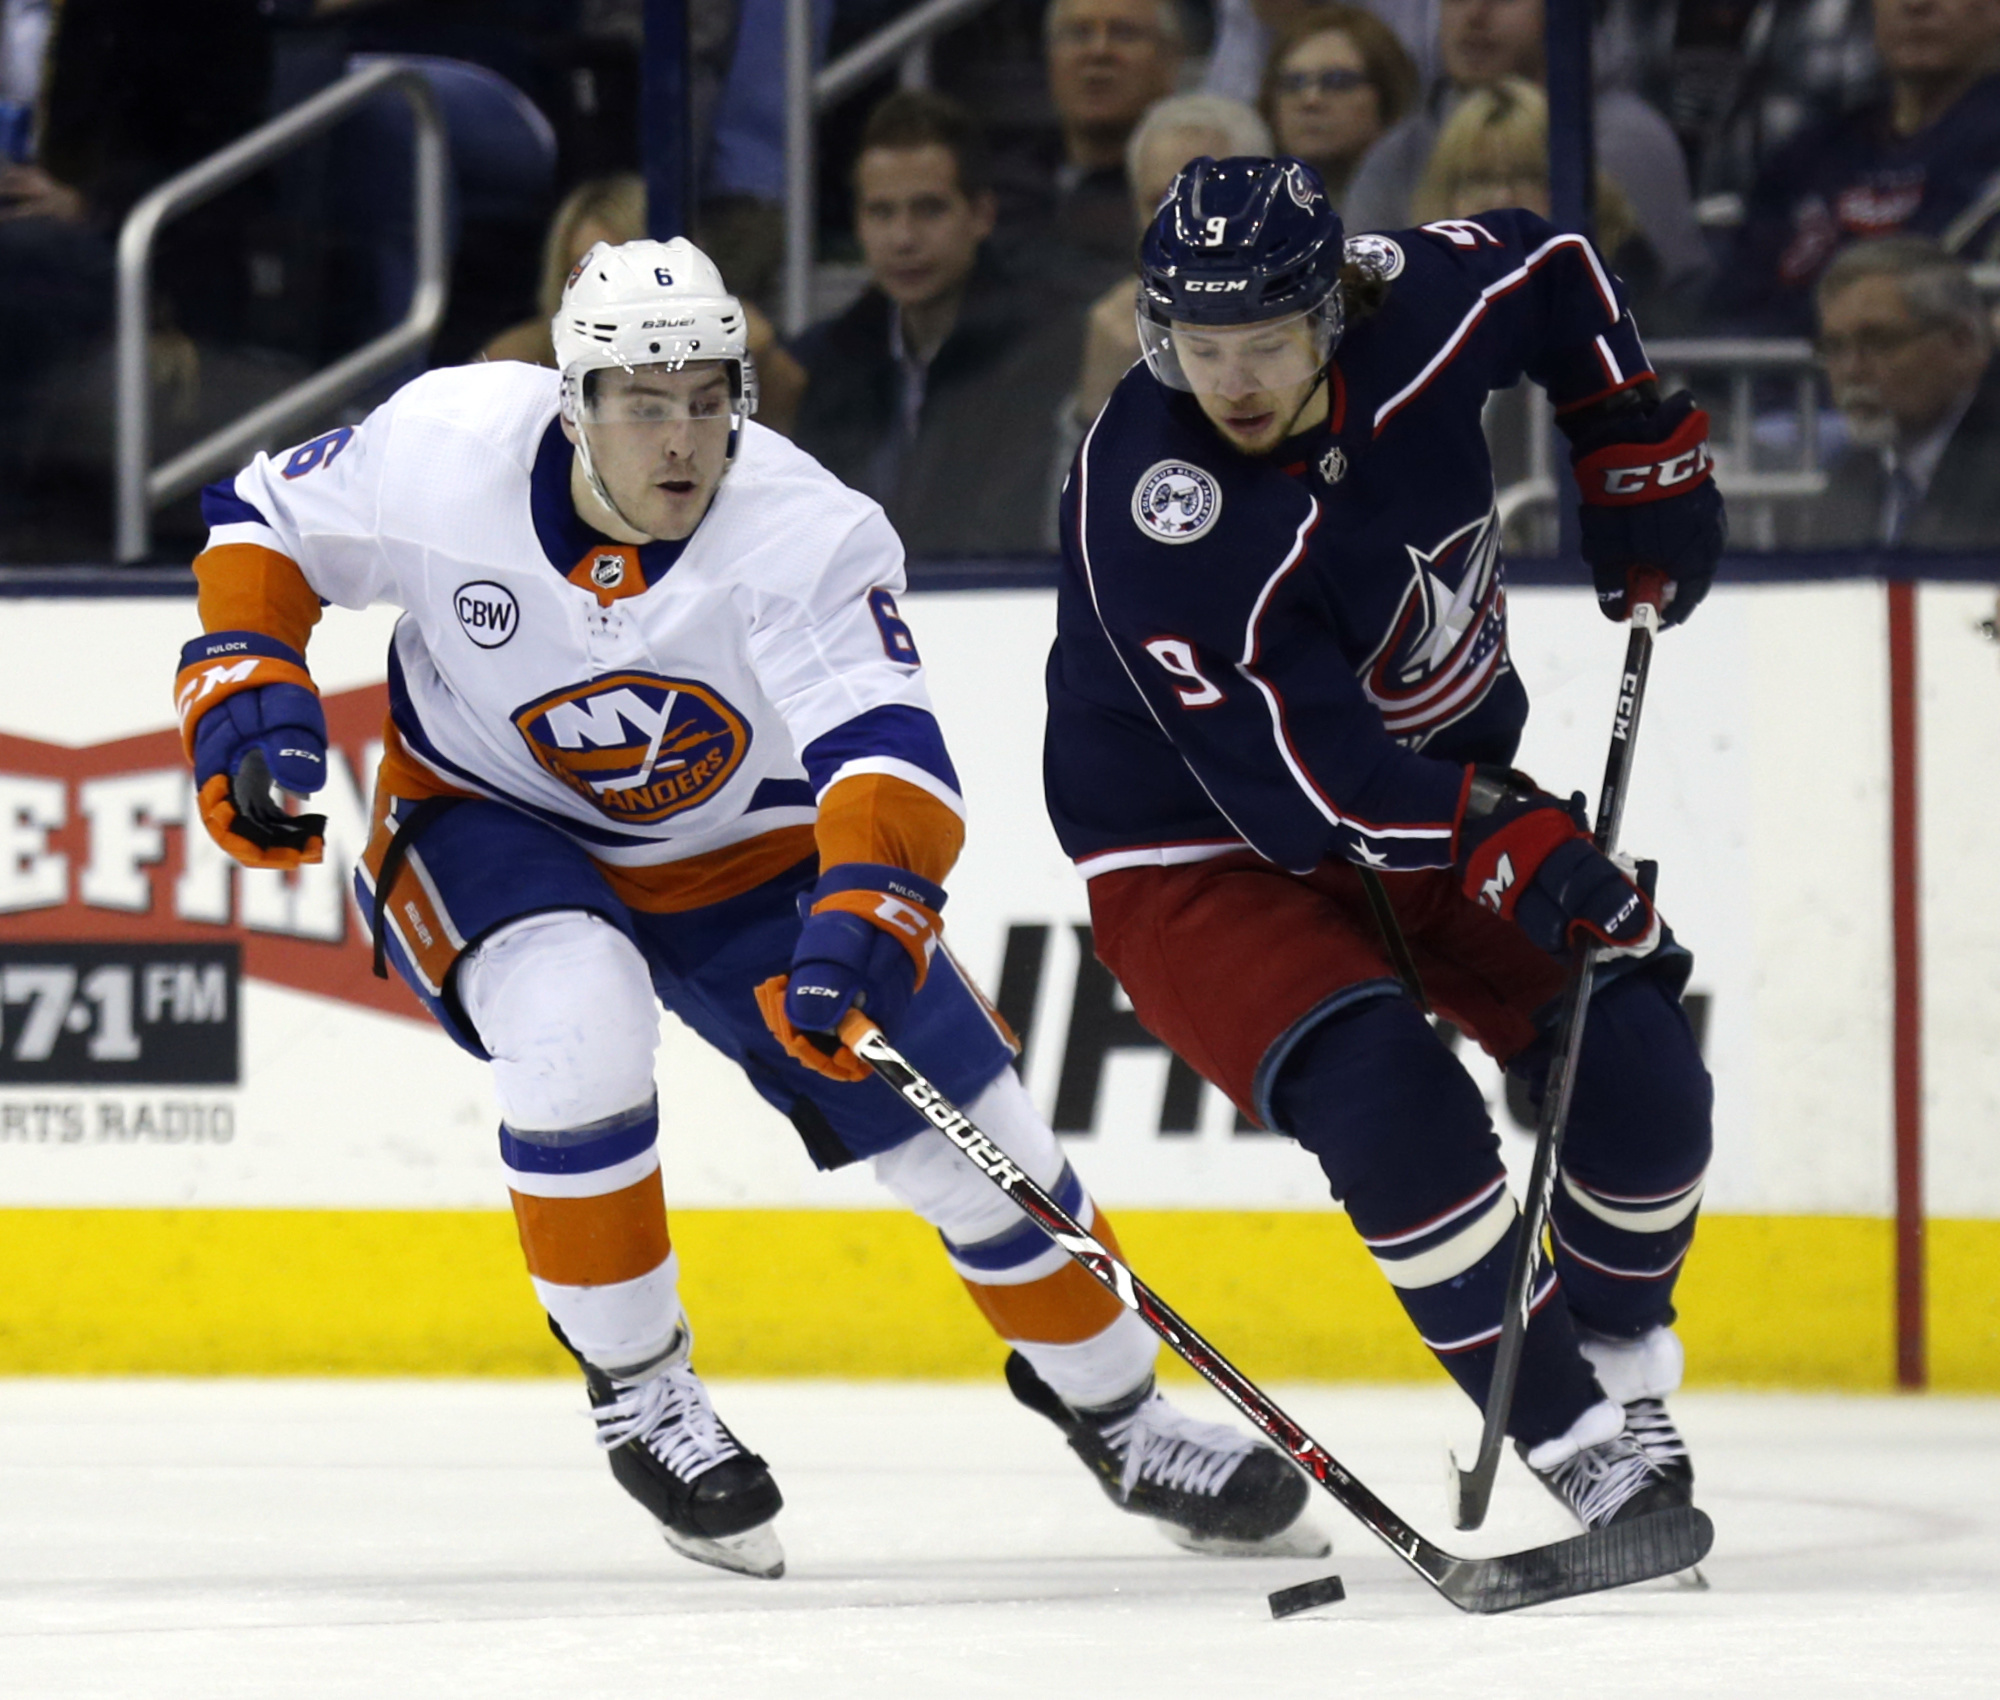 Another shutout for Bobrovsky as Blue Jackets beat Islanders